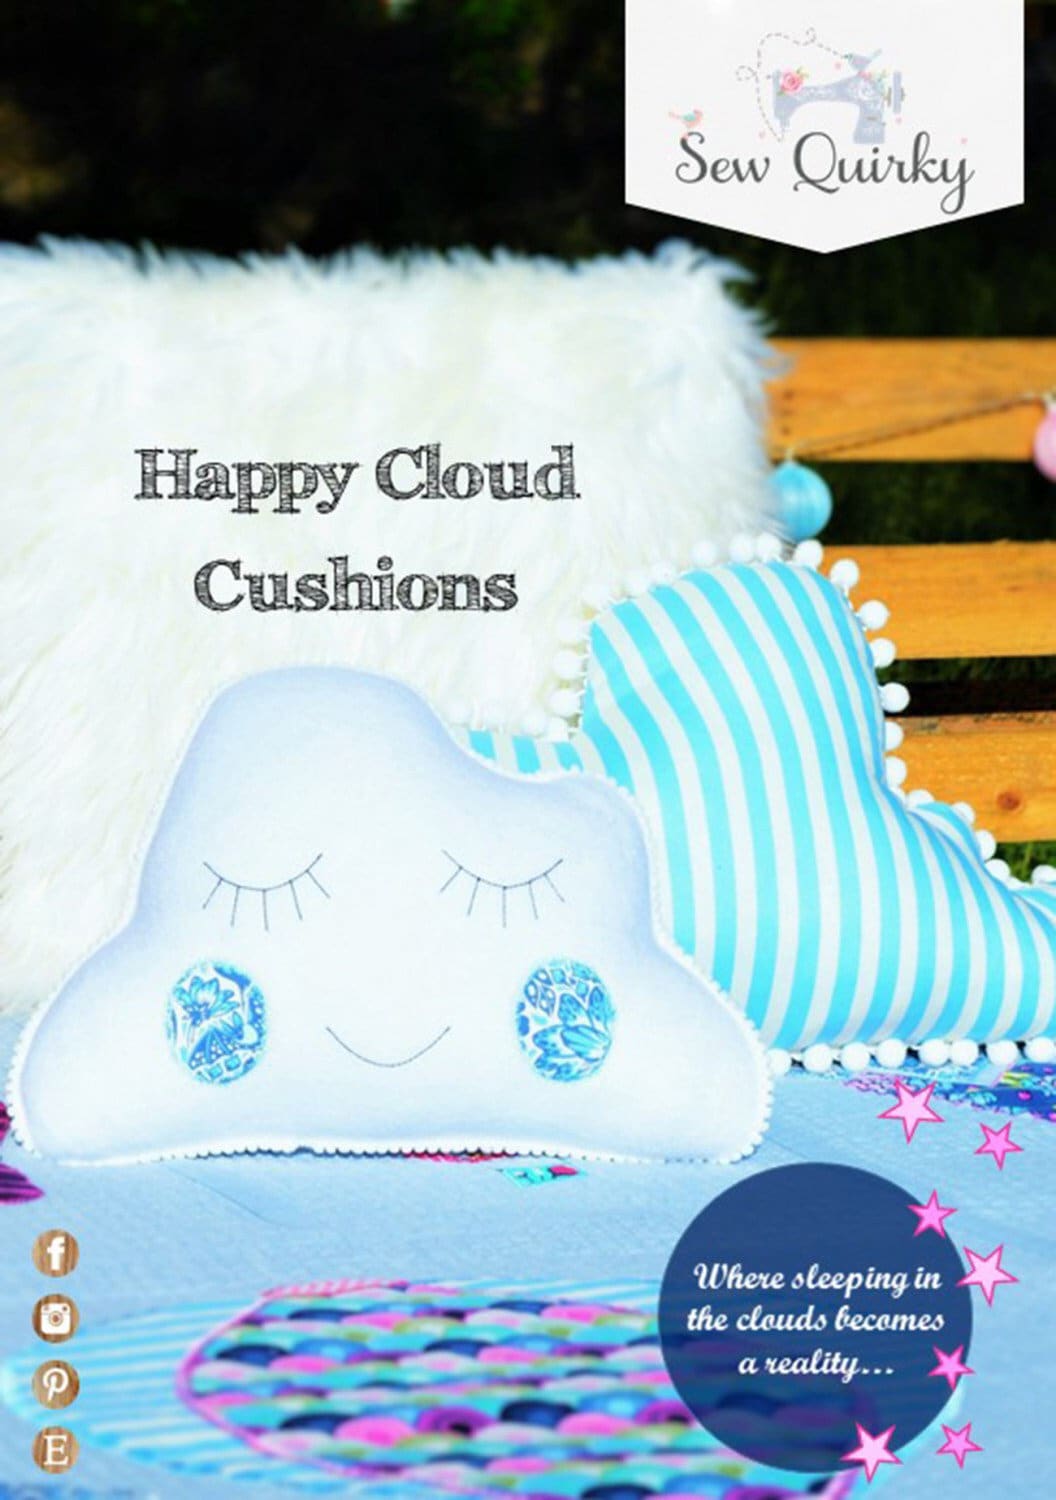 Happy Cloud Cushions - Sew Quirky - Mandy Murray - Pillow Pattern - Stuffie Pattern